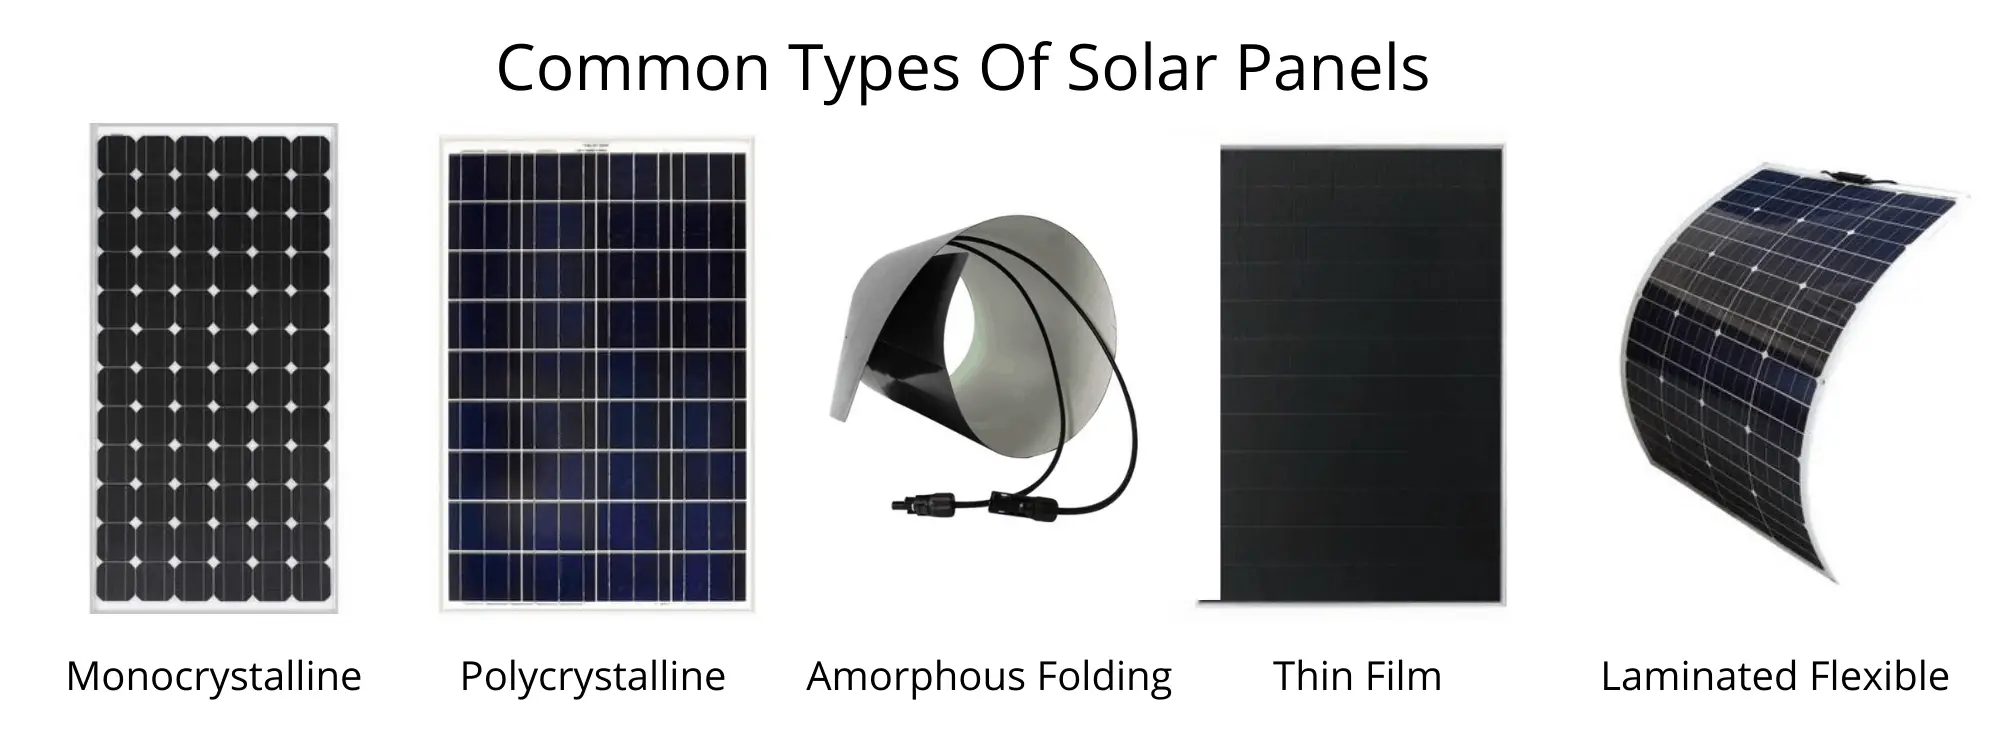 Is there a difference in the quality of solar panels?